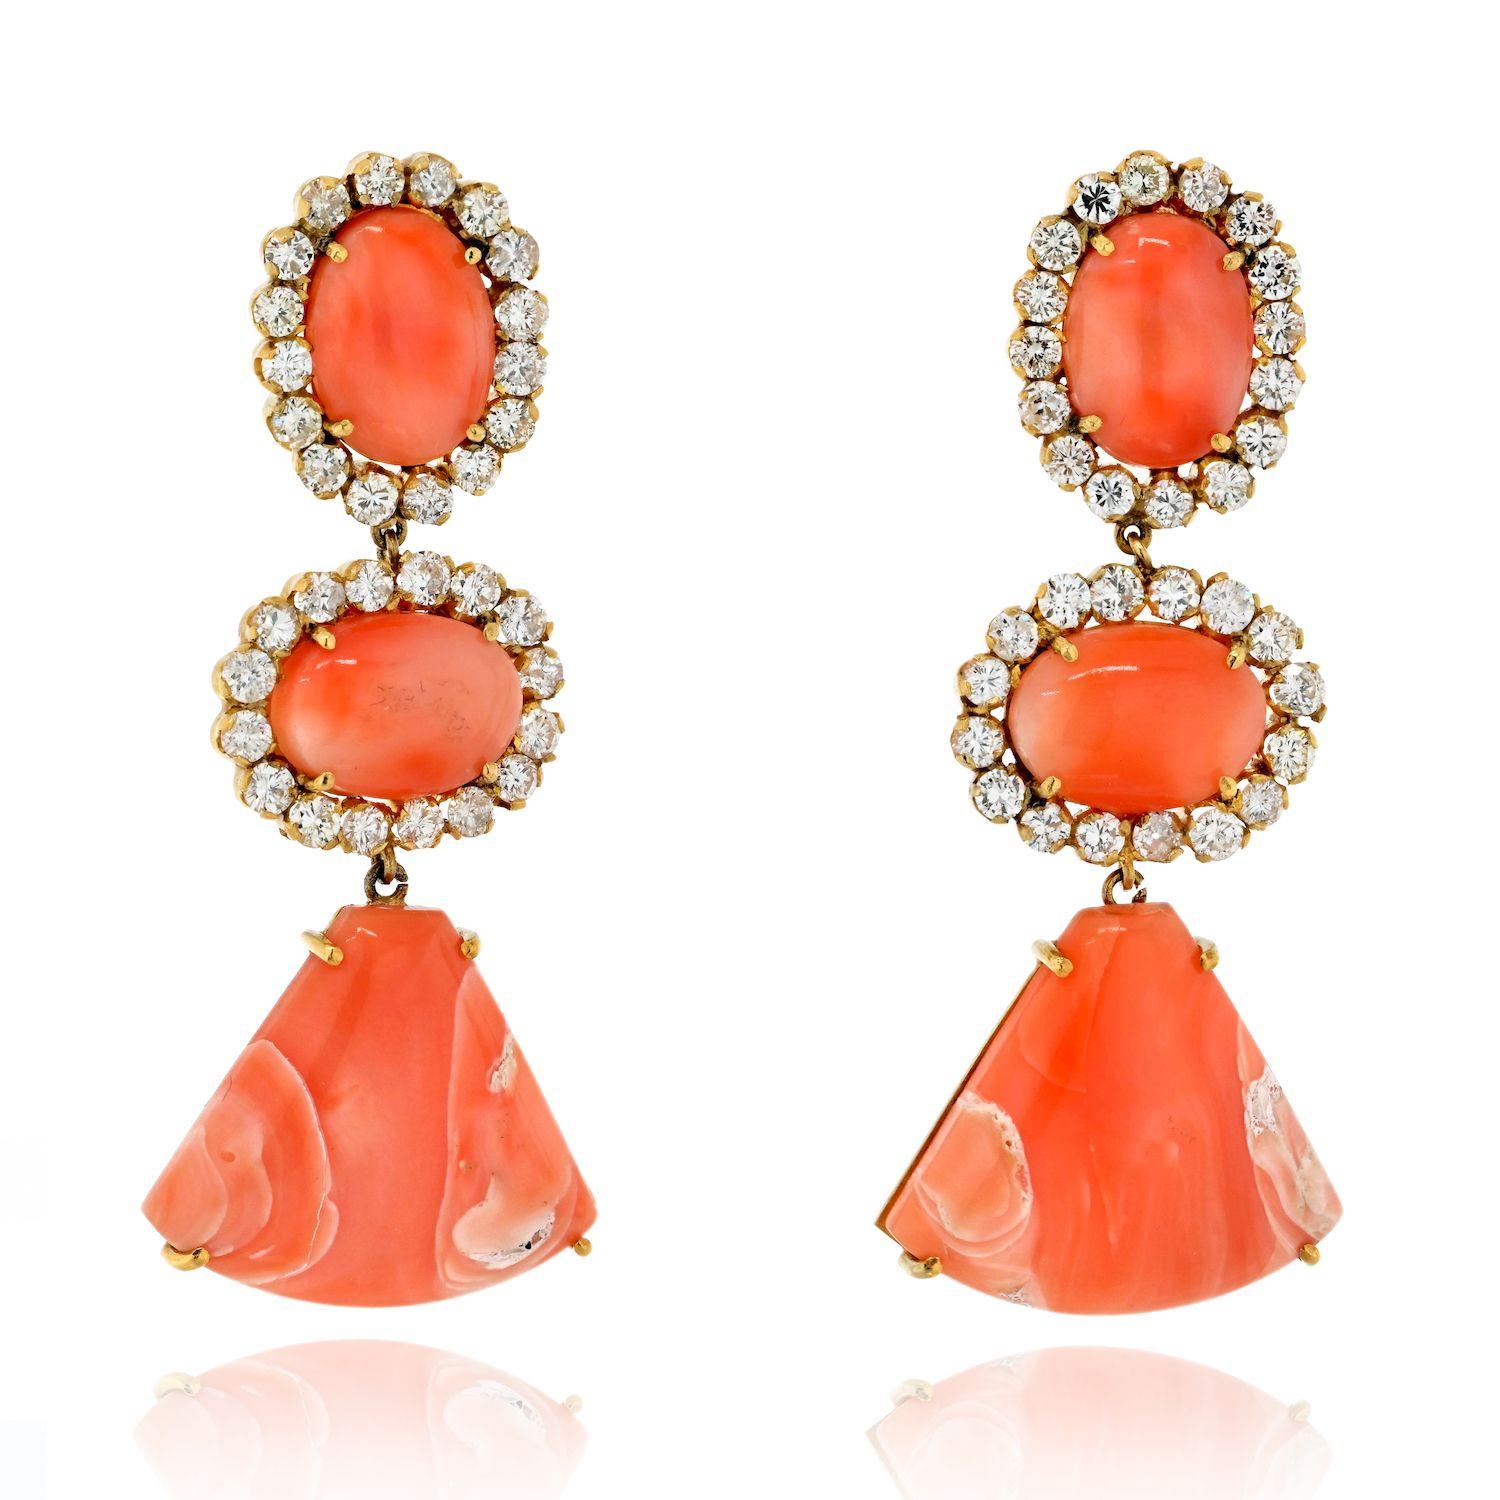 Glamorous and captivating this pair of Estate 18K Yellow Gold Coral and Diamond Dangling Drop Earrings is a true embodiment of elegance and allure. These exquisite earrings feature a design that seamlessly combines the natural beauty of coral with